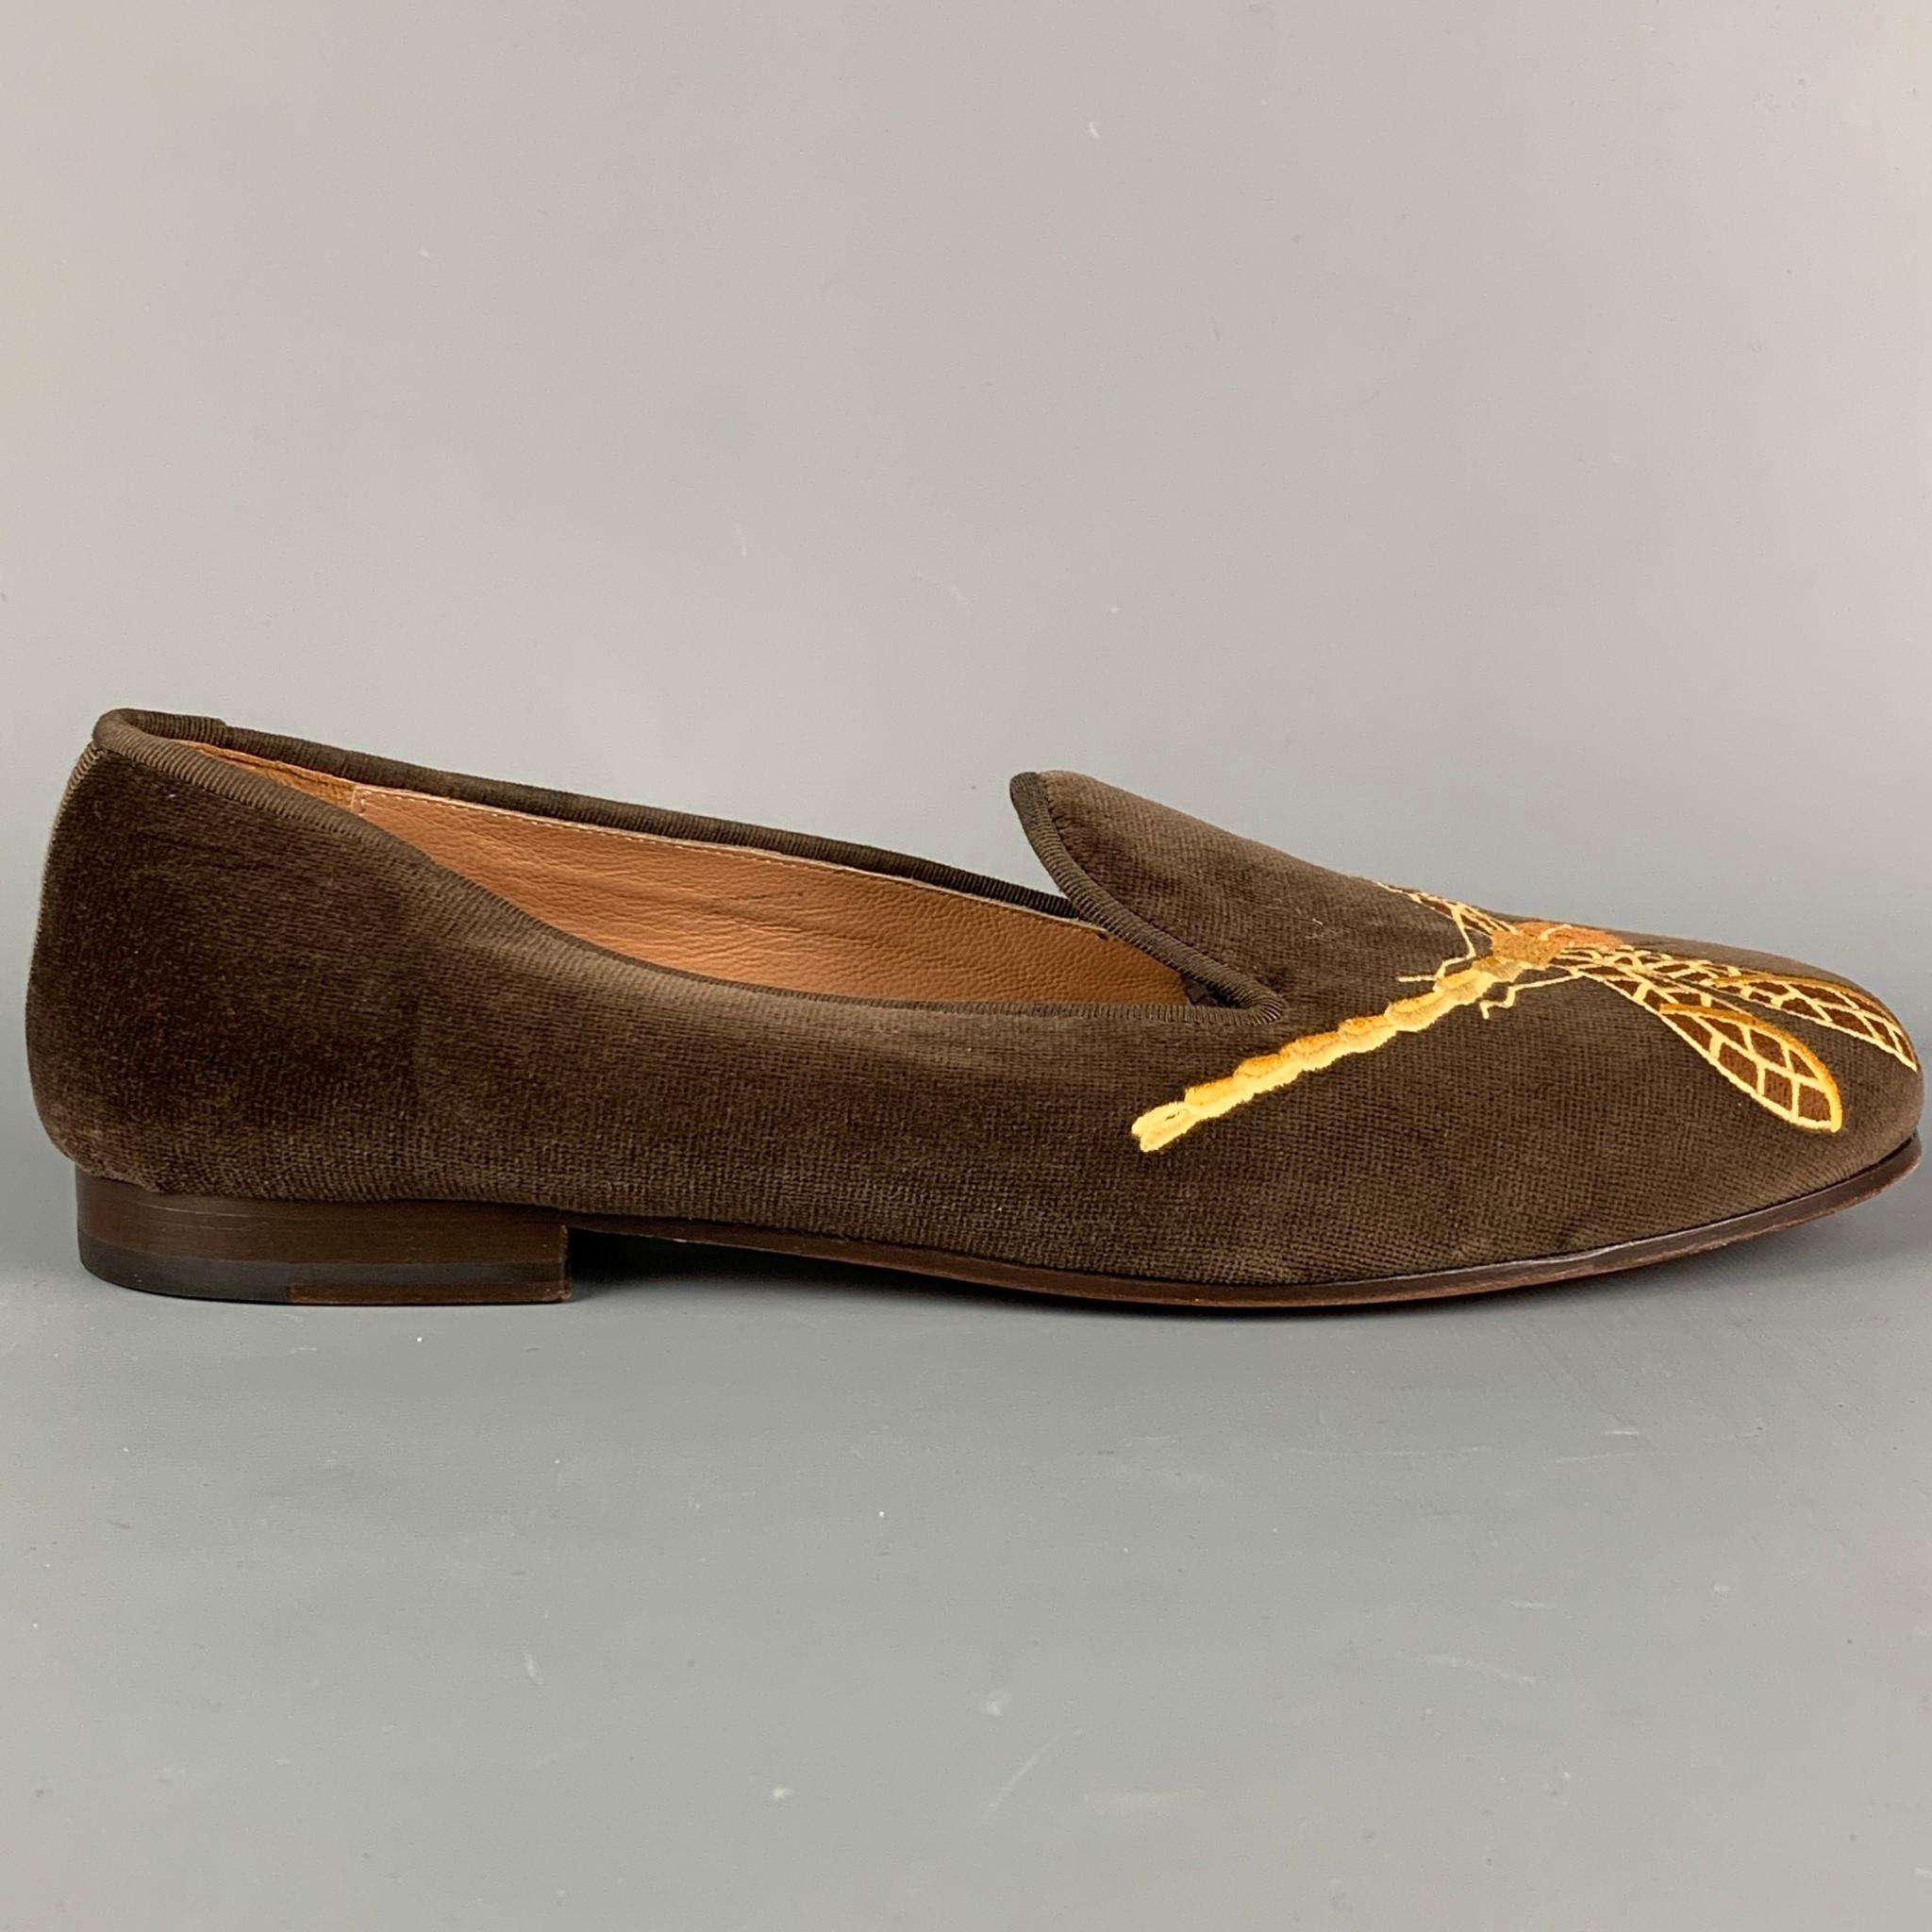 STUBBS & WOOTTON loafers comes in a brown velvet featuring a embroidered 'dragonfly' design and a slip on style. Made in Spain. 

Very Good Pre-Owned Condition.
Marked: 10.5
Original Retail Price: $575.00

Outsole: 11.5 in. x 4 in. 